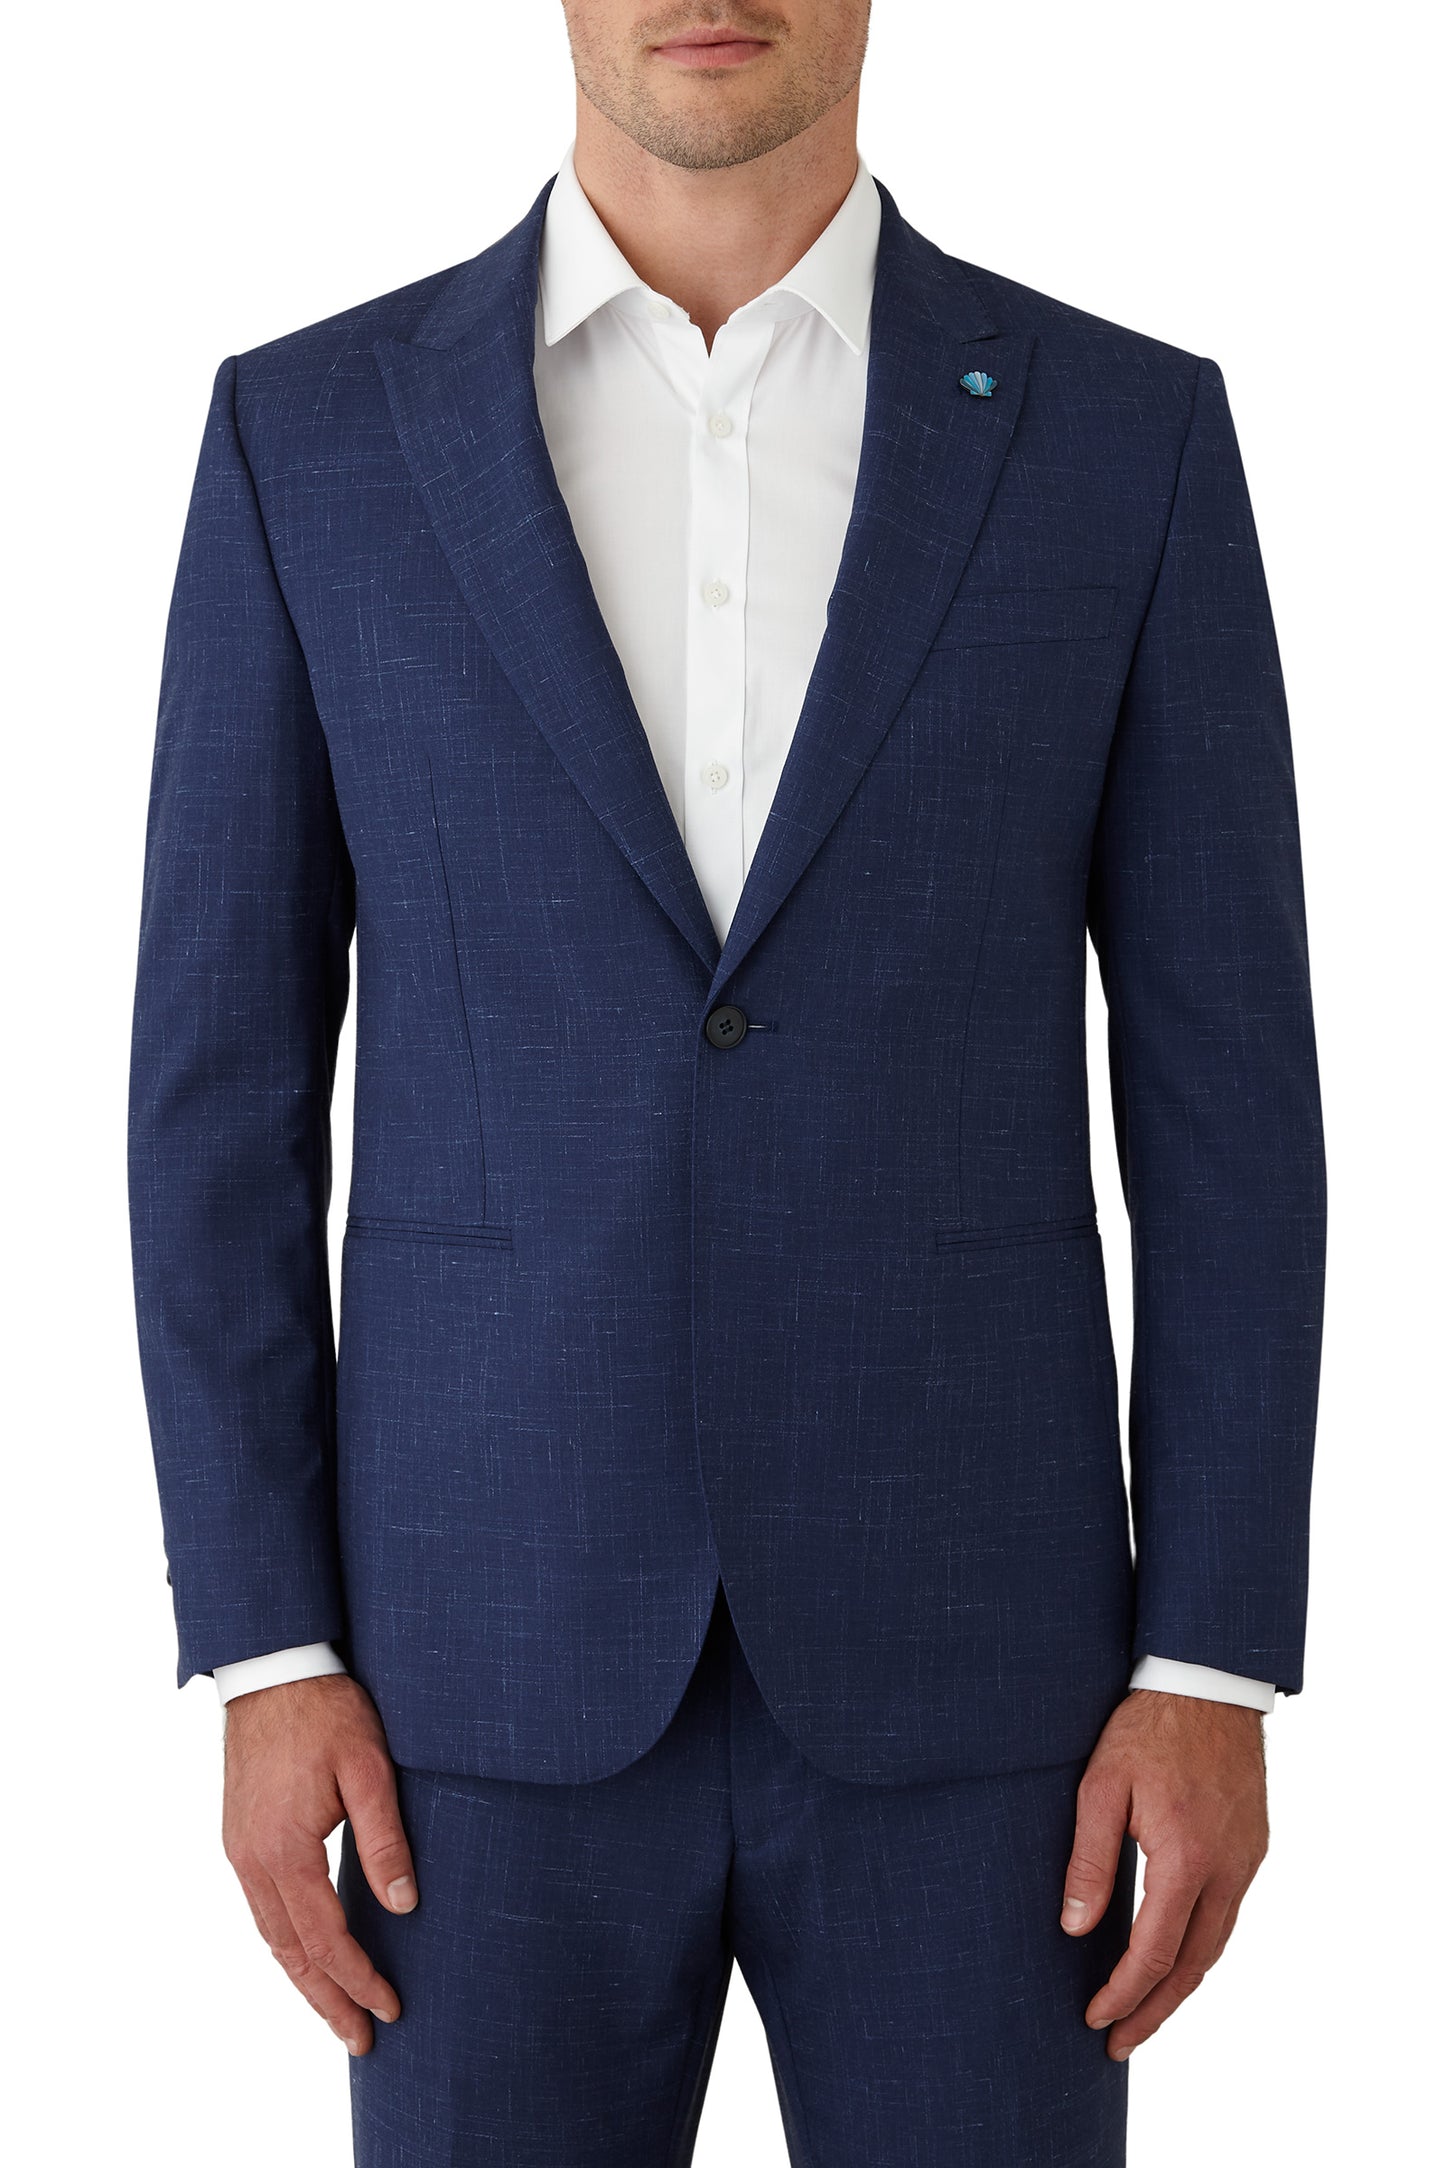 Gibson - Ionic/Caper Suit - Blue/White Textured